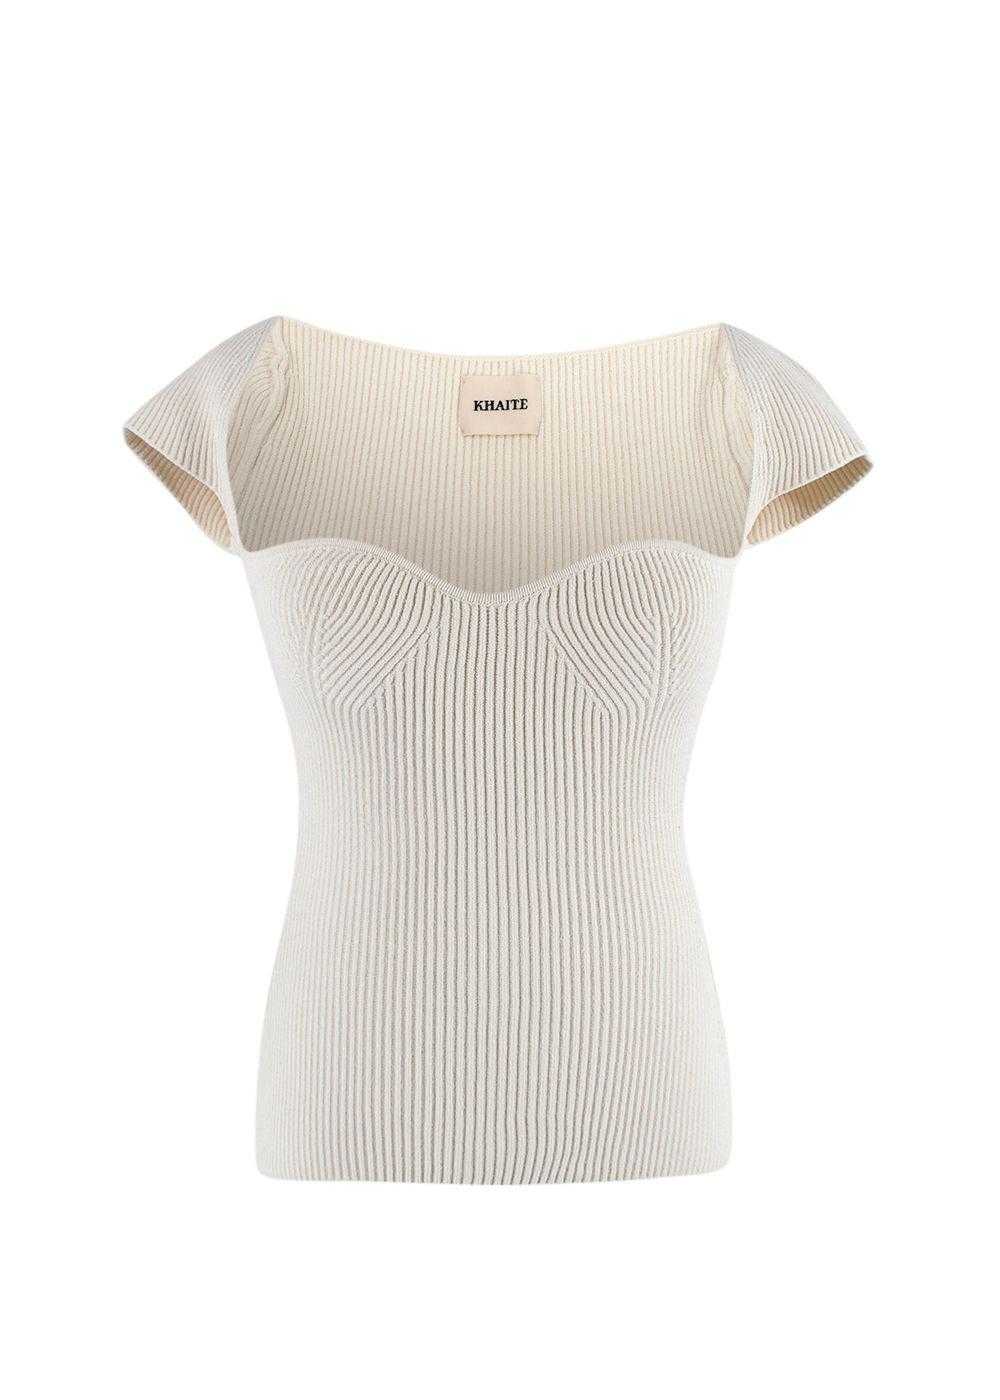 Managed by hewi Khaite Ribbed White Ista Top - image 2